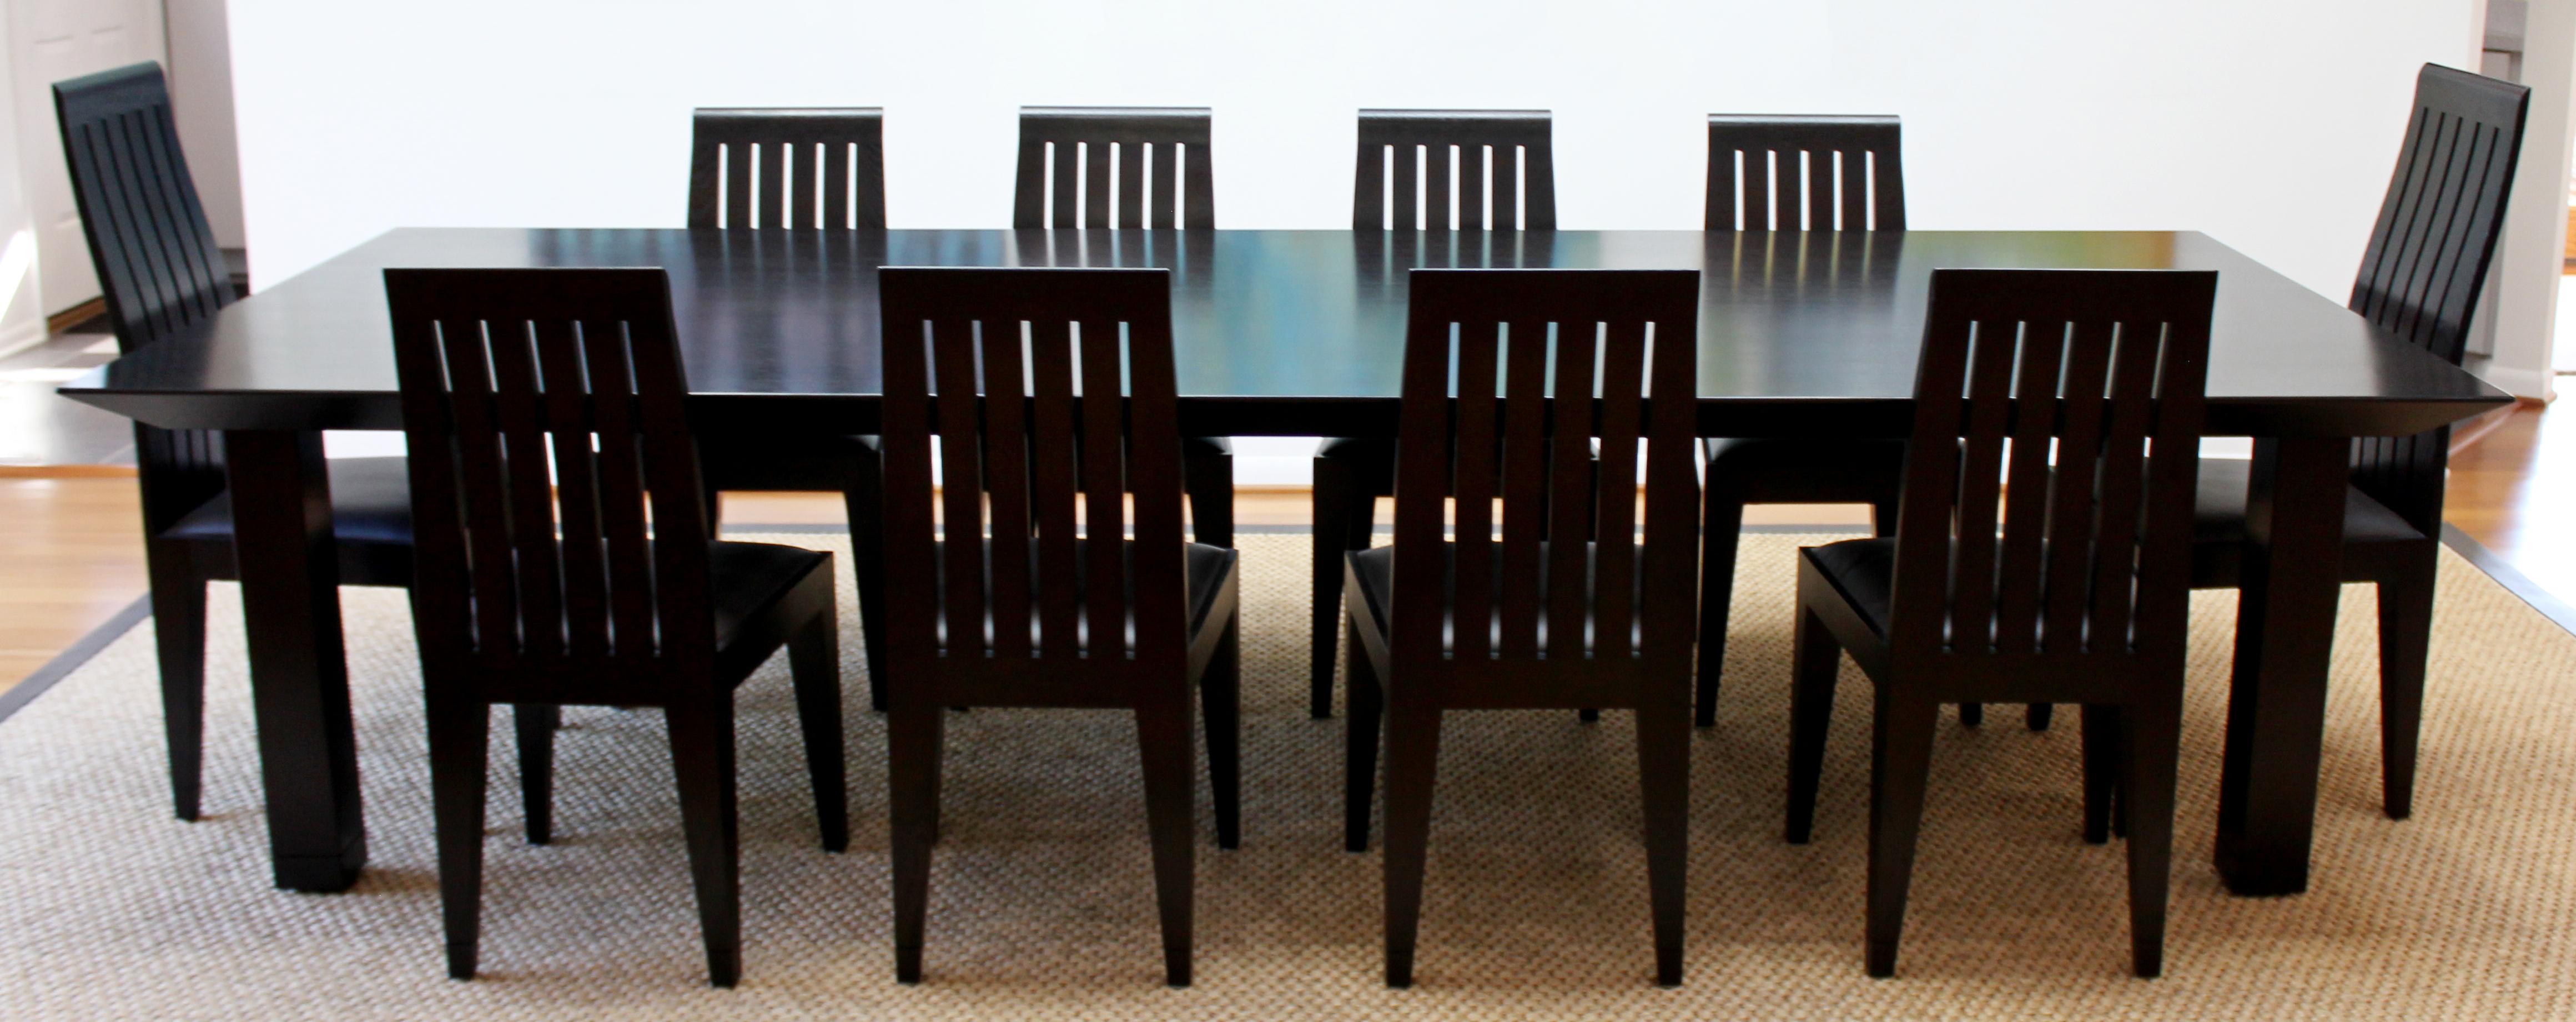 For your consideration is an extraordinary dining set, including a long black wood table and set of ten side dining chairs by Ohashi, 2 captain chairs and 8 side chairs, circa the 1980s. In excellent condition. The dimensions of the table are 140